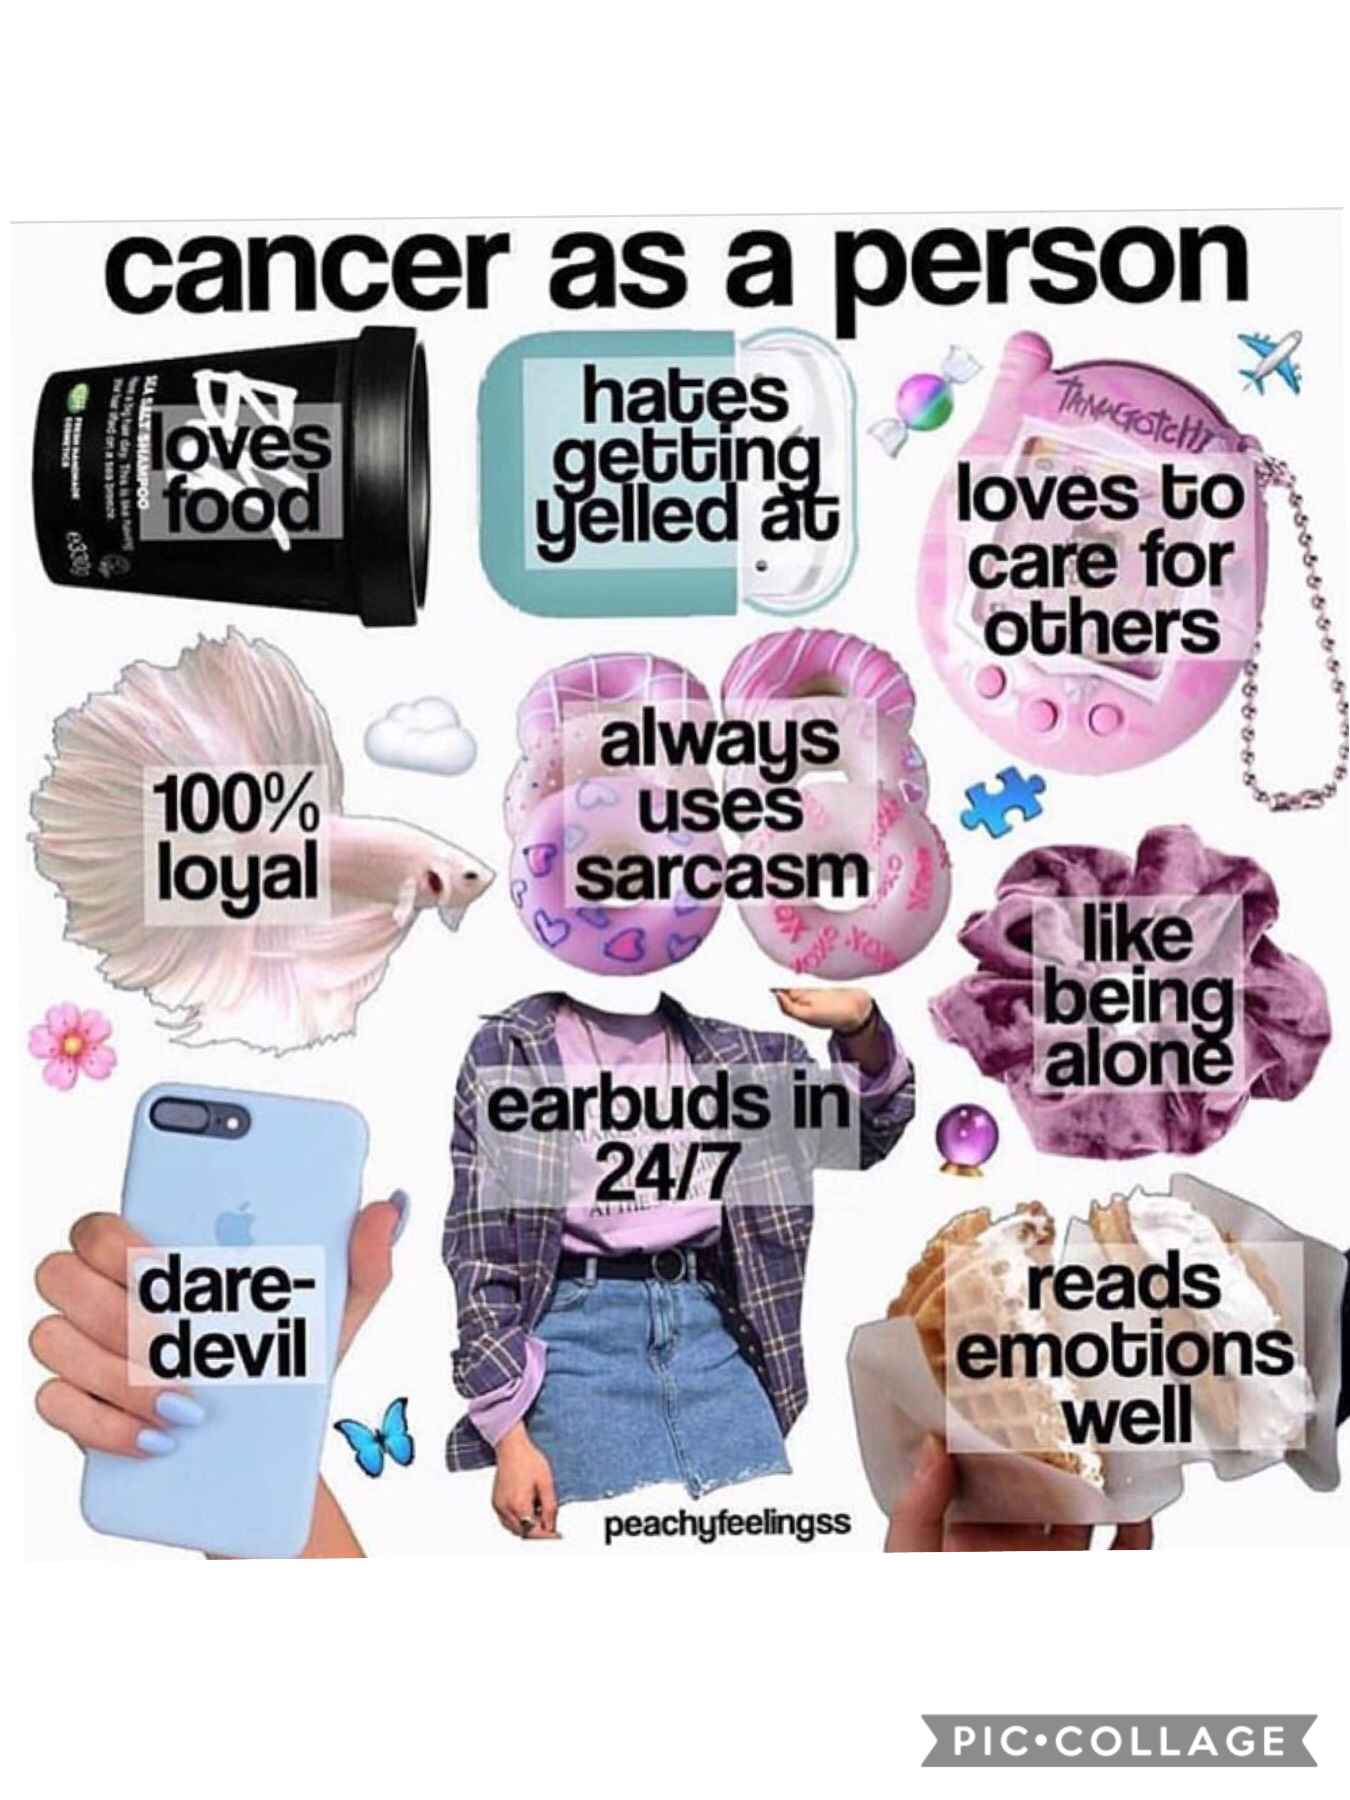 Cancer as a person